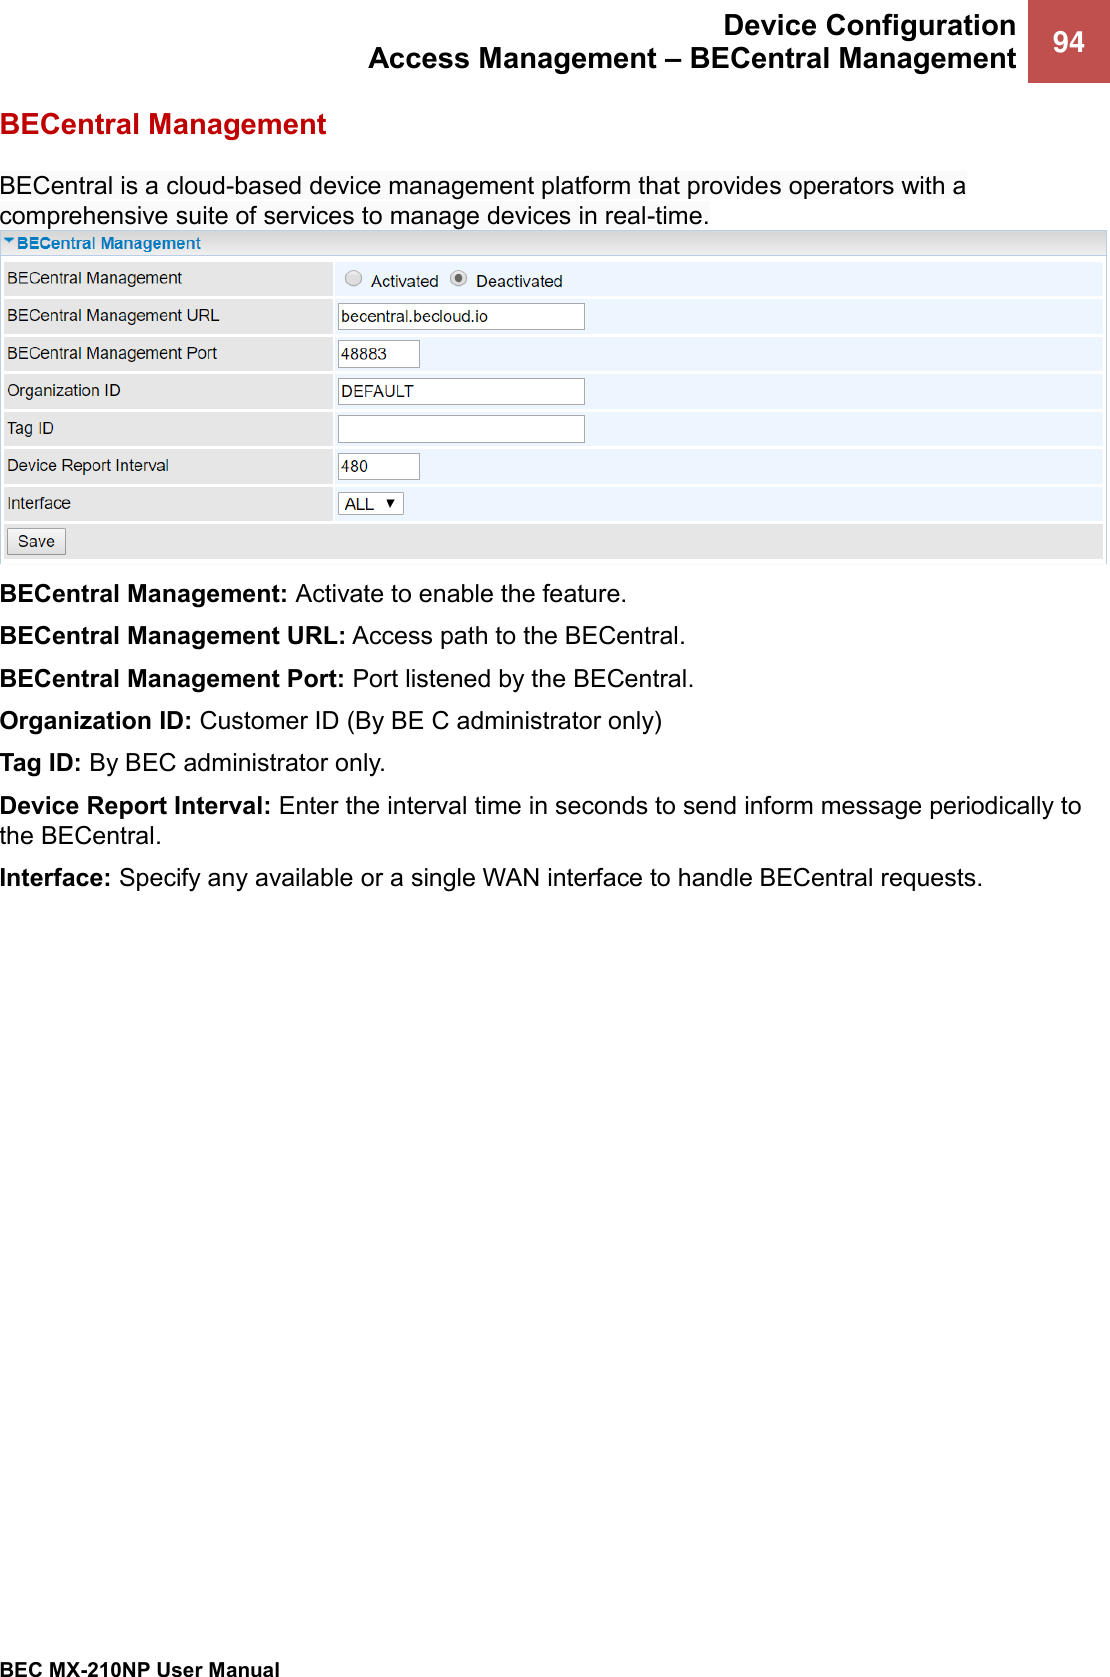  Device Configuration Access Management – BECentral Management 94   BEC MX-210NP User Manual  BECentral Management BECentral is a cloud-based device management platform that provides operators with a comprehensive suite of services to manage devices in real-time. BECentral Management: Activate to enable the feature. BECentral Management URL: Access path to the BECentral. BECentral Management Port: Port listened by the BECentral. Organization ID: Customer ID (By BE C administrator only) Tag ID: By BEC administrator only.  Device Report Interval: Enter the interval time in seconds to send inform message periodically to the BECentral.  Interface: Specify any available or a single WAN interface to handle BECentral requests. 